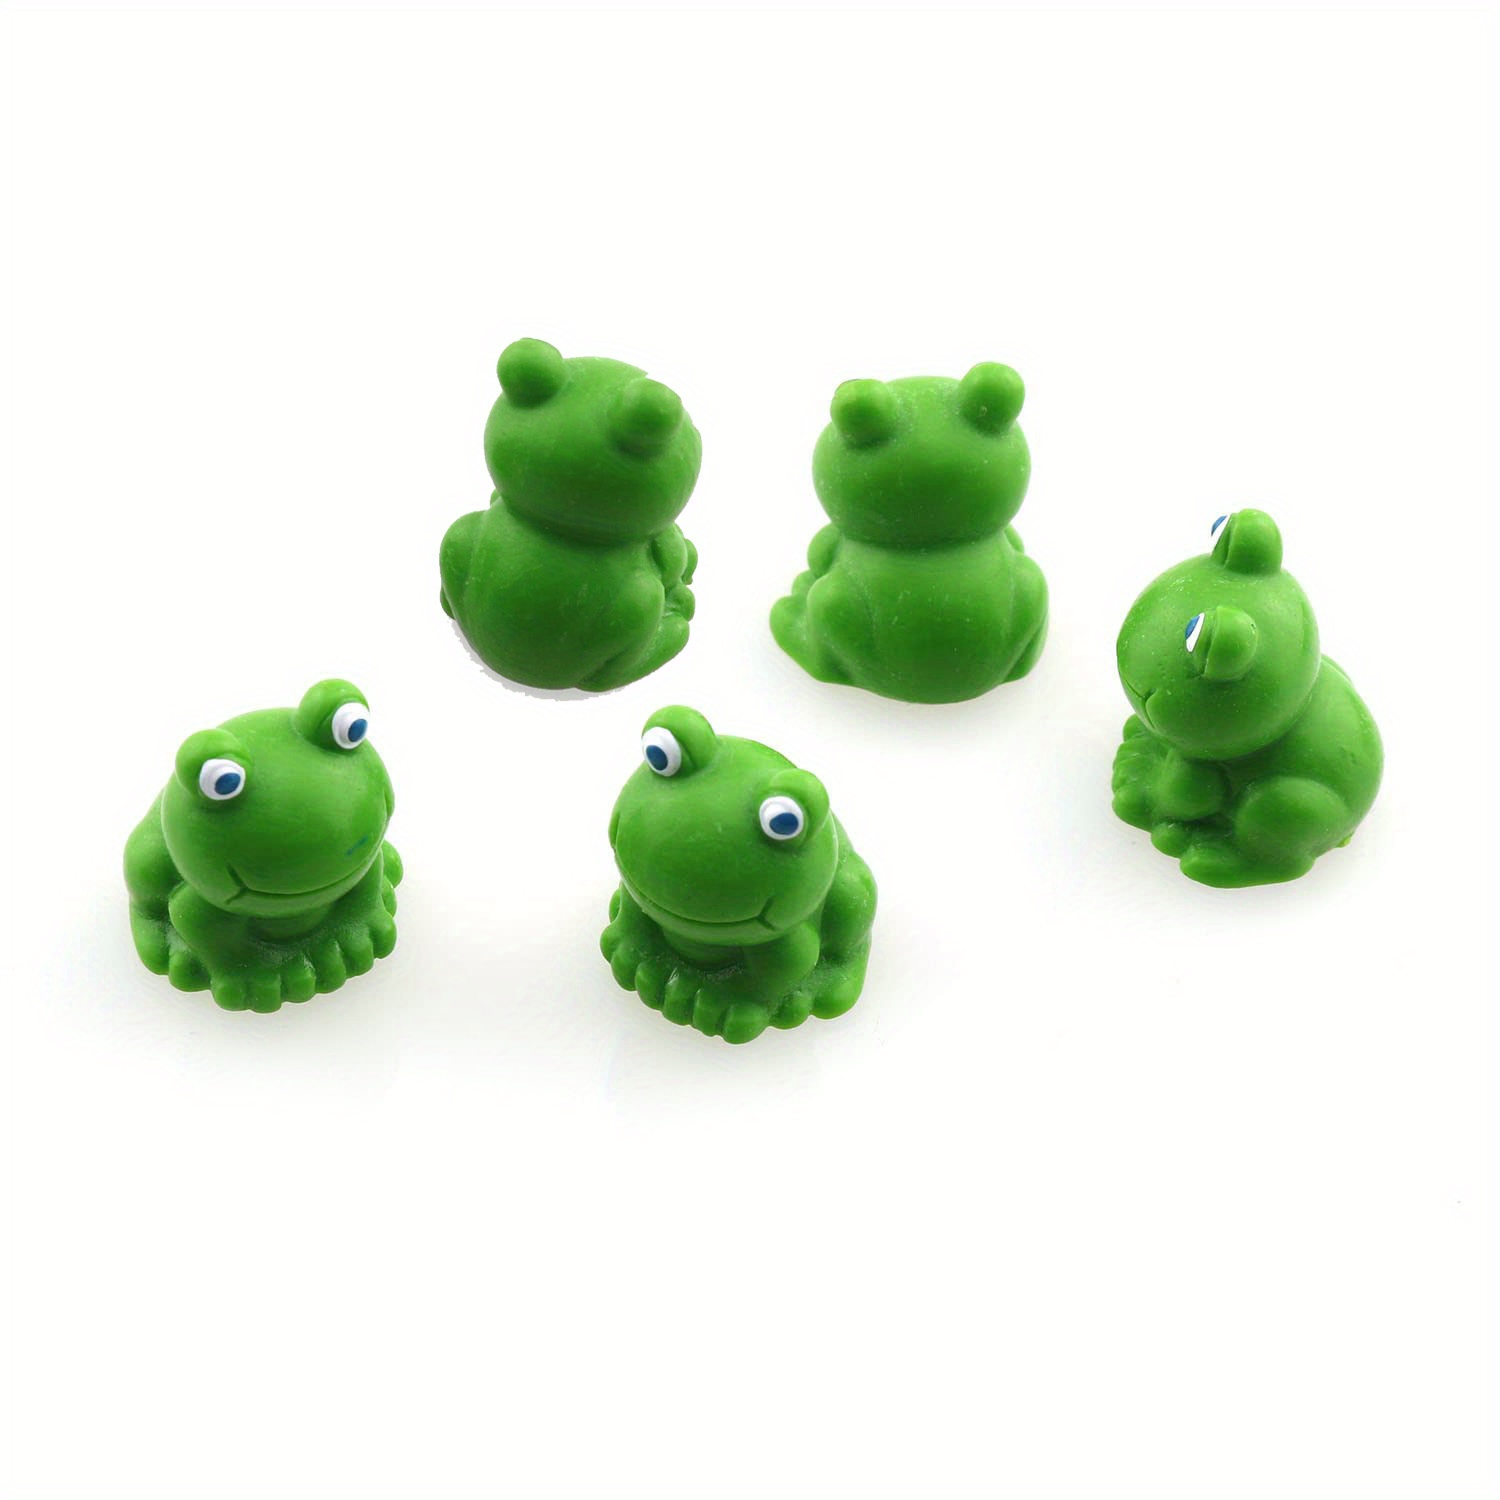 Miniature Tropical Frogs Set of 3 Fairy Garden Frogs Figurines, Bright  Green & Orange Pond Frog Accessory Mini Animal for Terrariums 